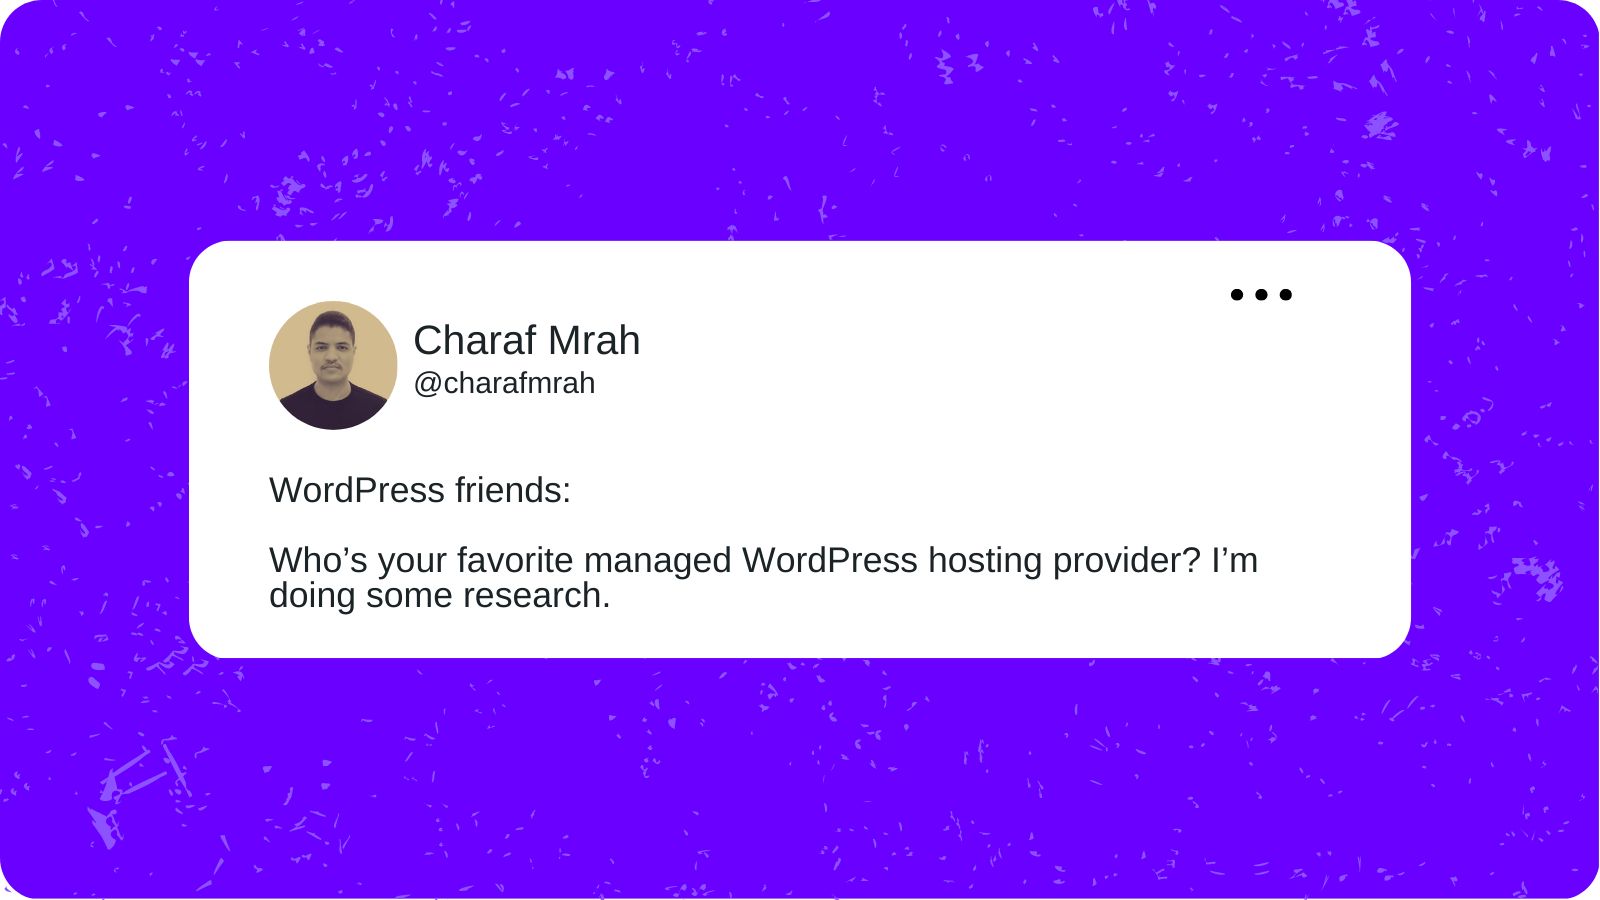 A tweet from Charaf Mrah that reads “WordPress friends: Who’s your favorite managed WordPress hosting provider? I’m doing some research."